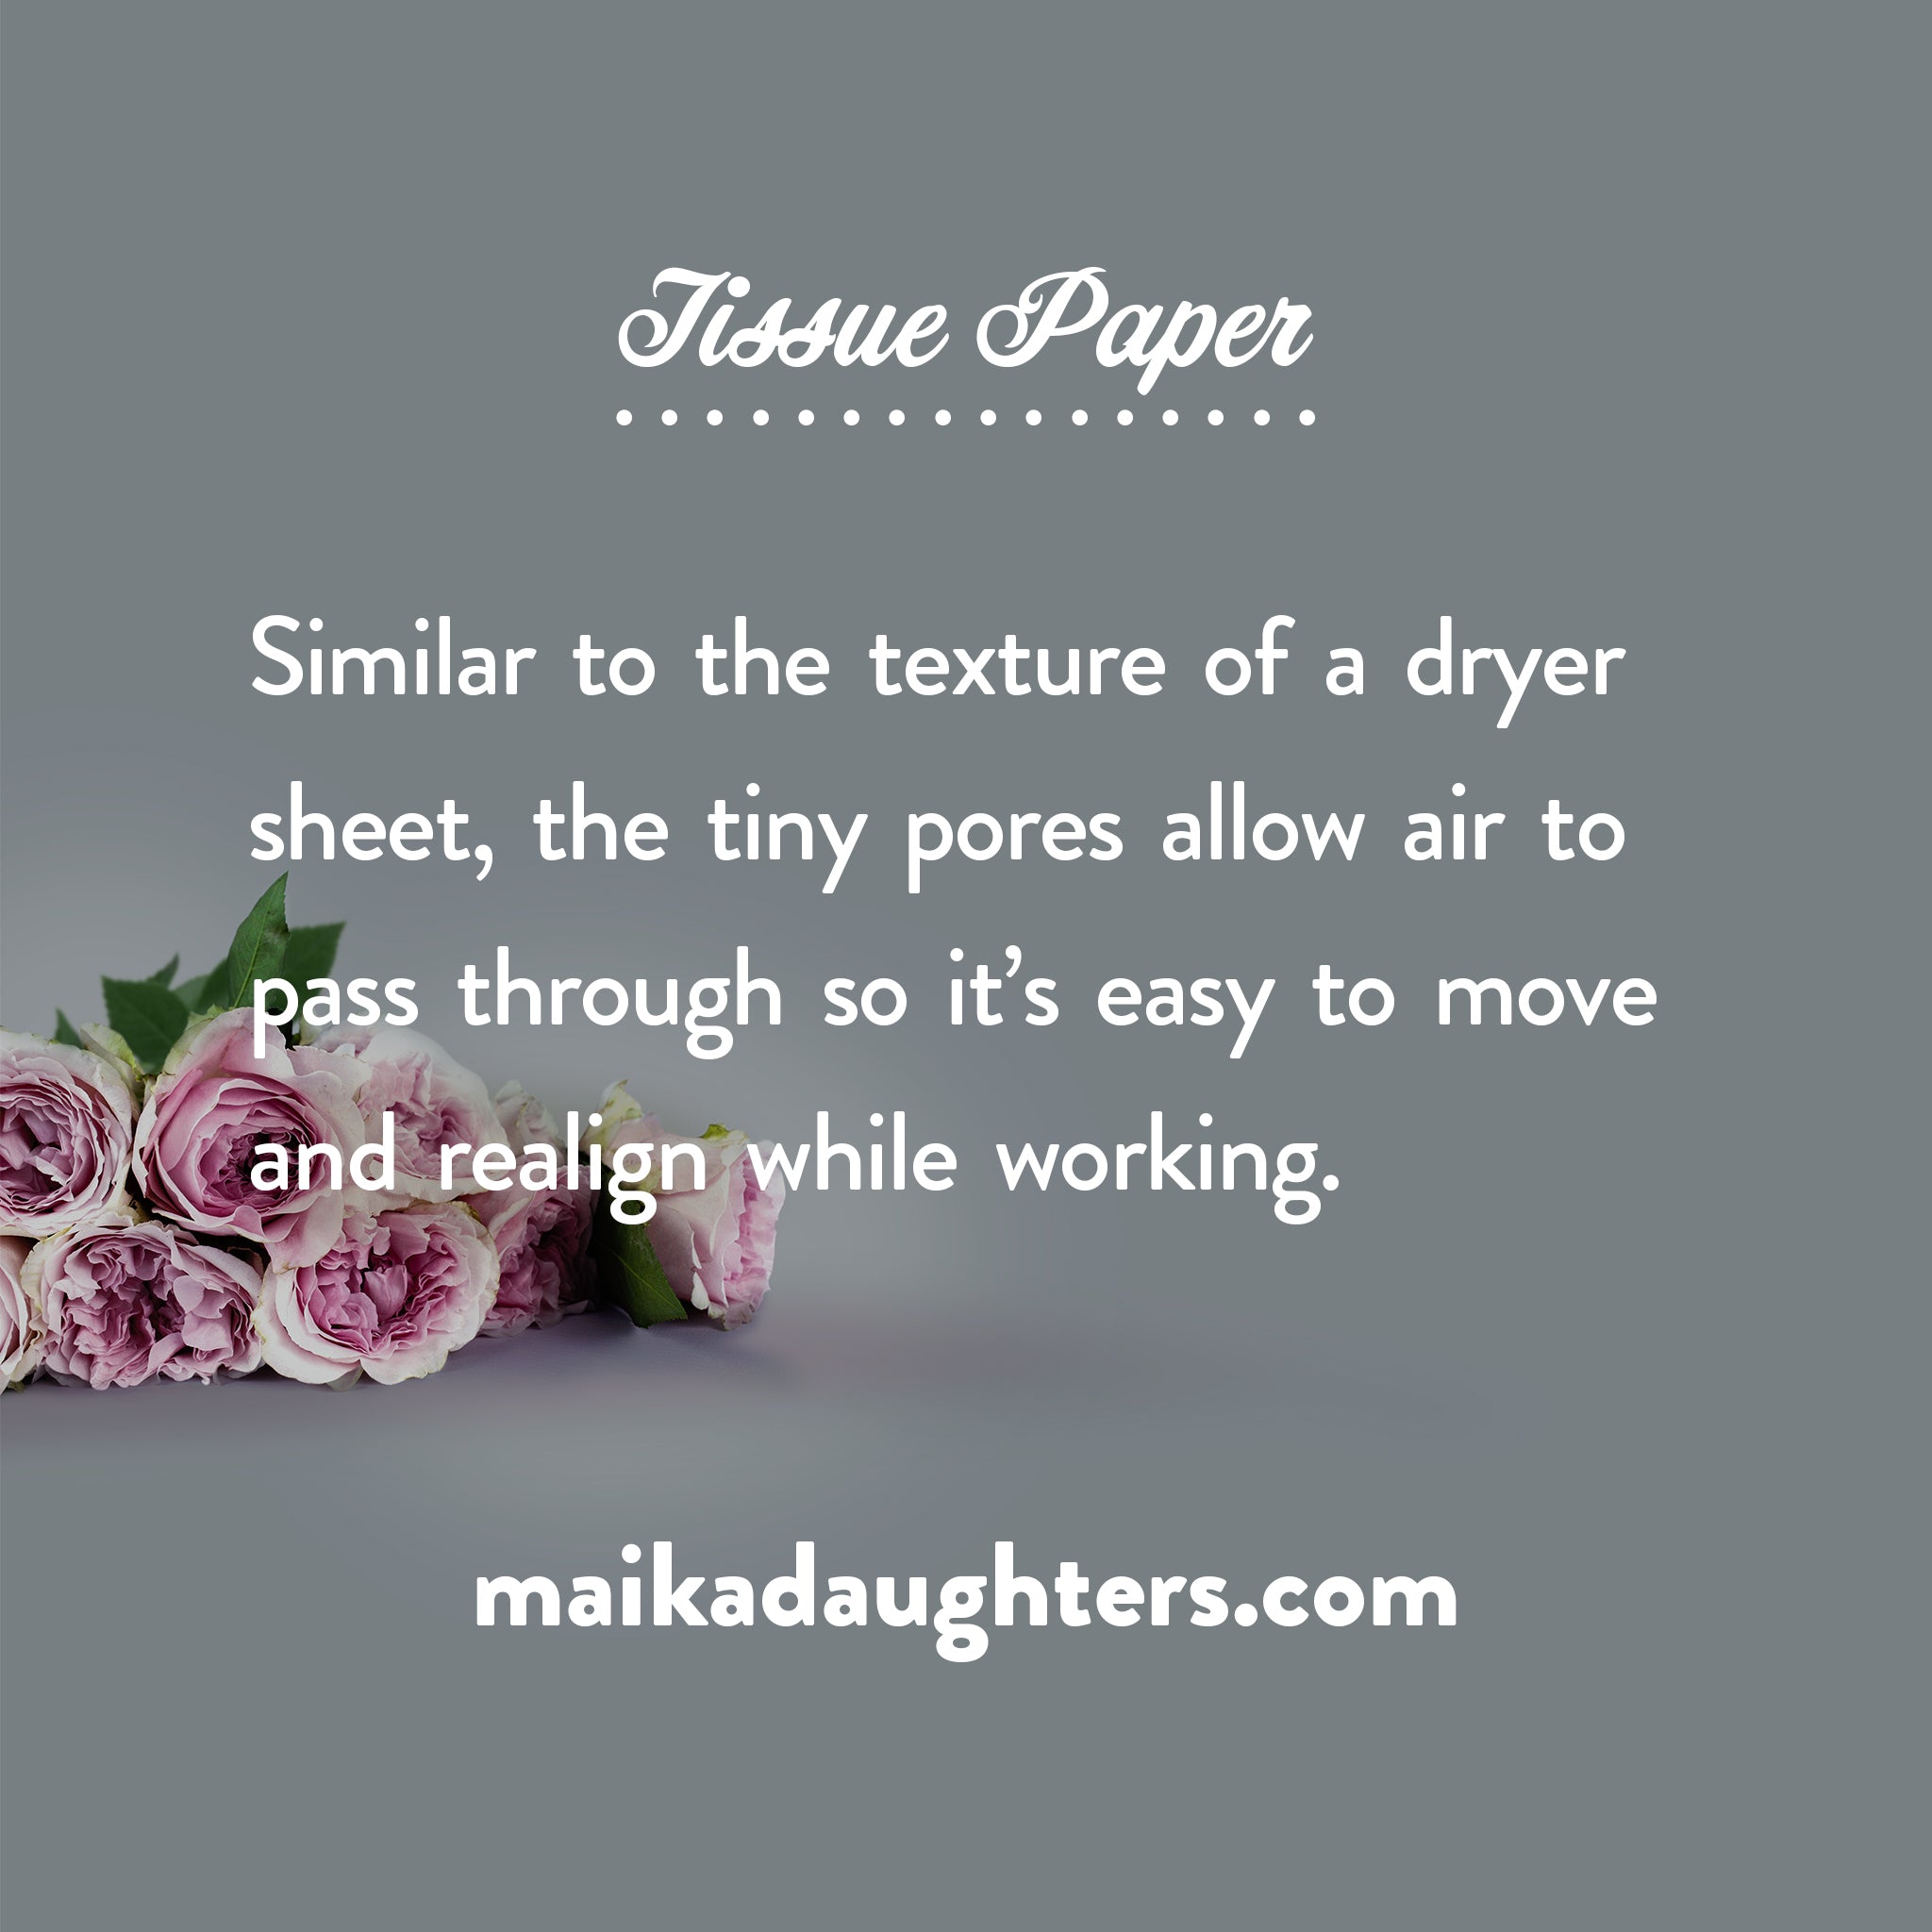 A gray background with a bouquet of roses. White text is shown reading: Tissue paper. Similar to the texture o a dryer sheet, the tiny pores allow air to pass through so it’s easy to move and realign while working. Maikadaughters.com